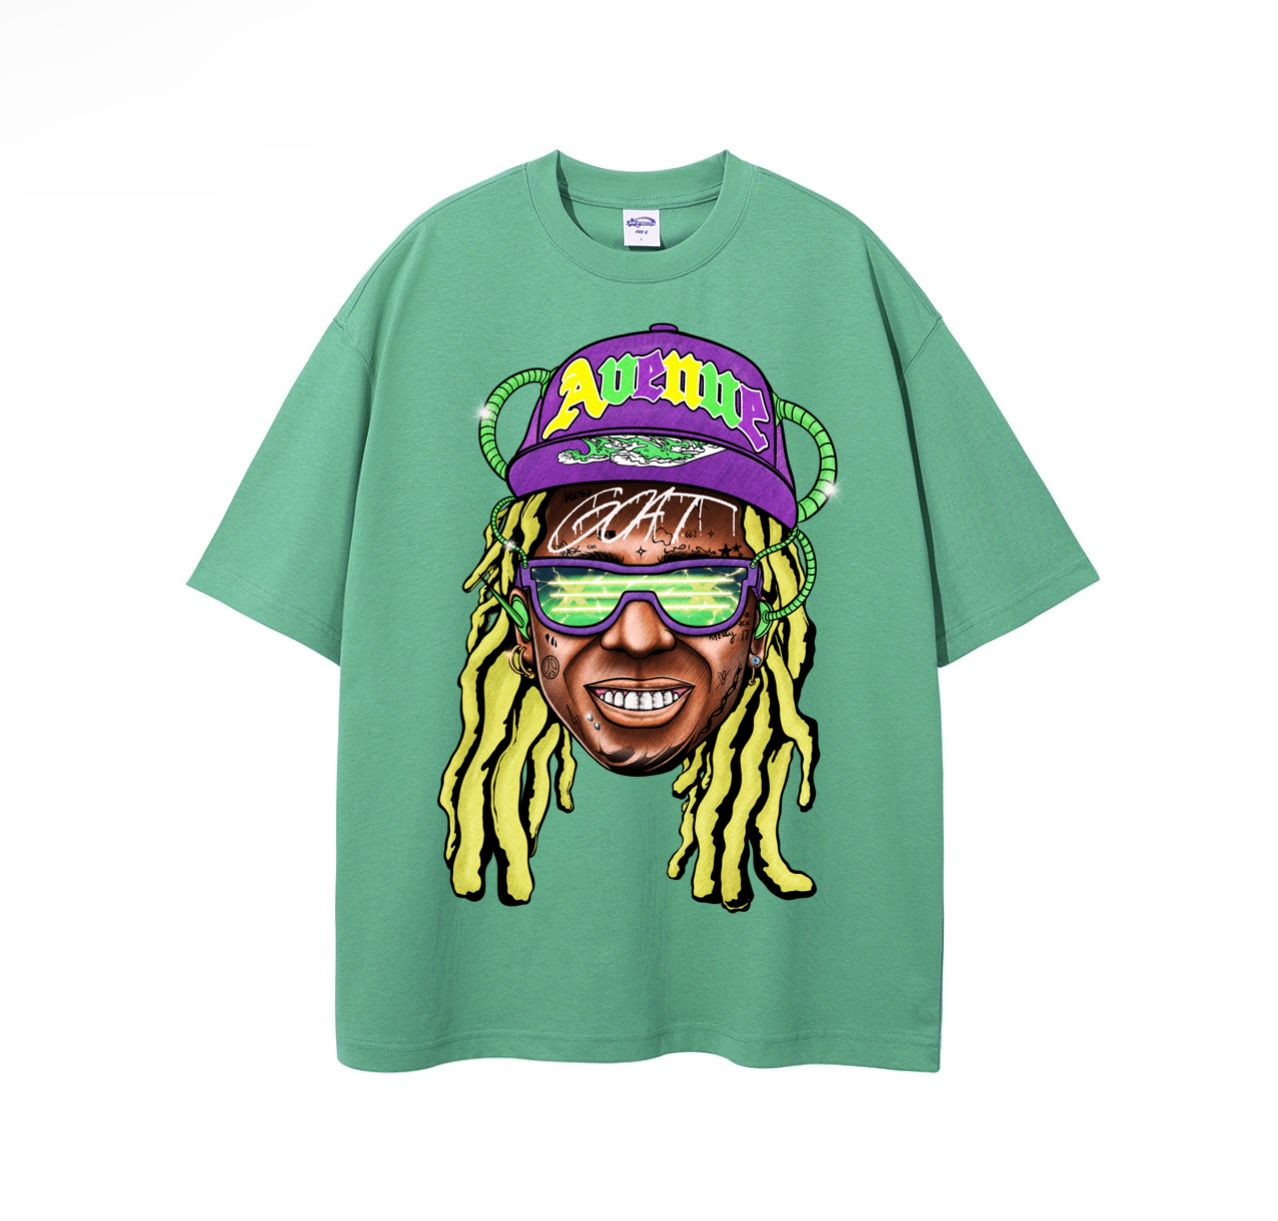 Weezy Avenue Mardi Gras T-Shirt. Available ready to ship. Local pick up or delivery available